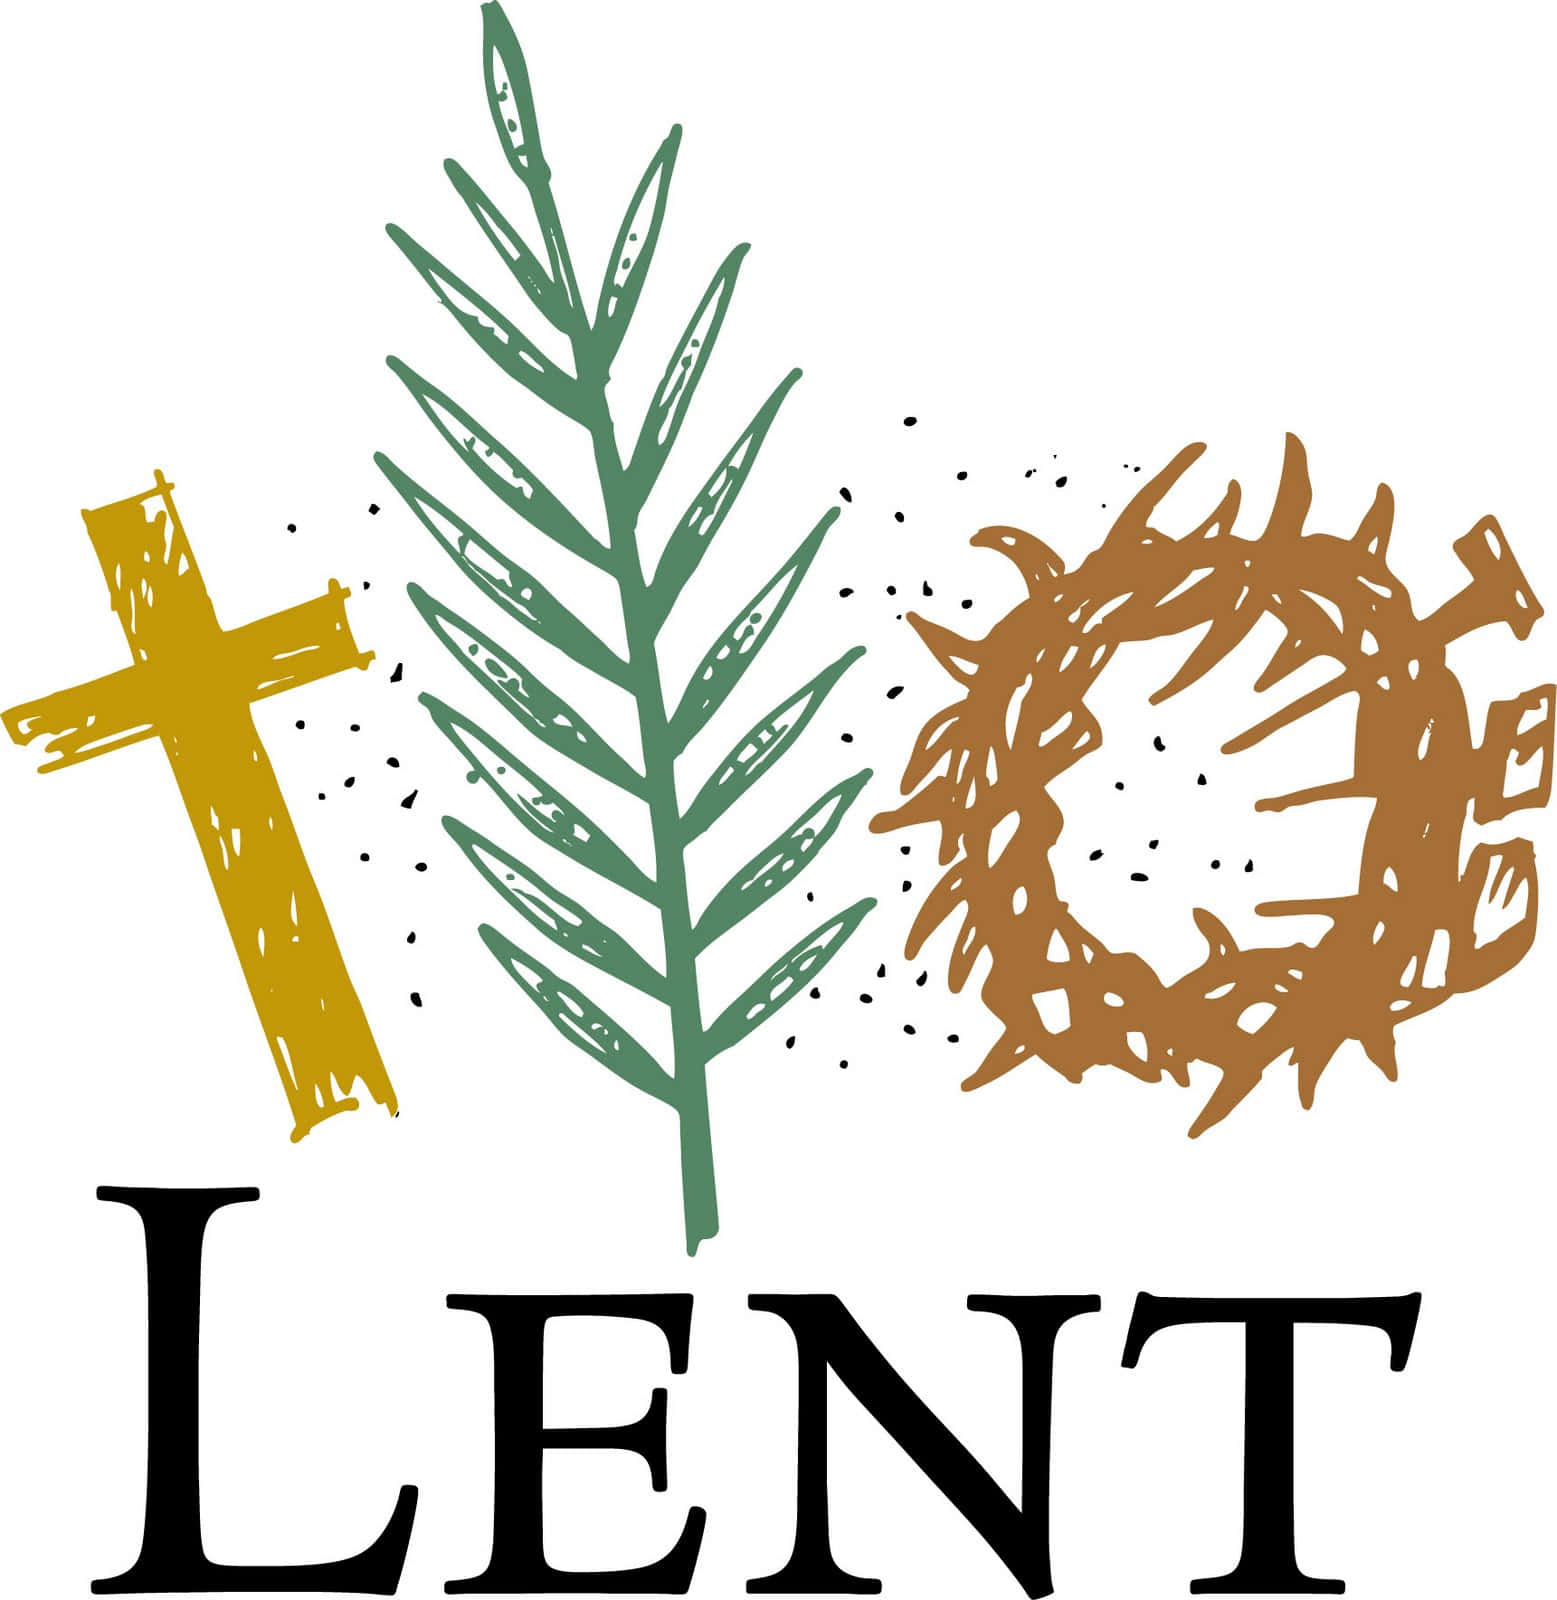 'Discovering our faith in Lent'